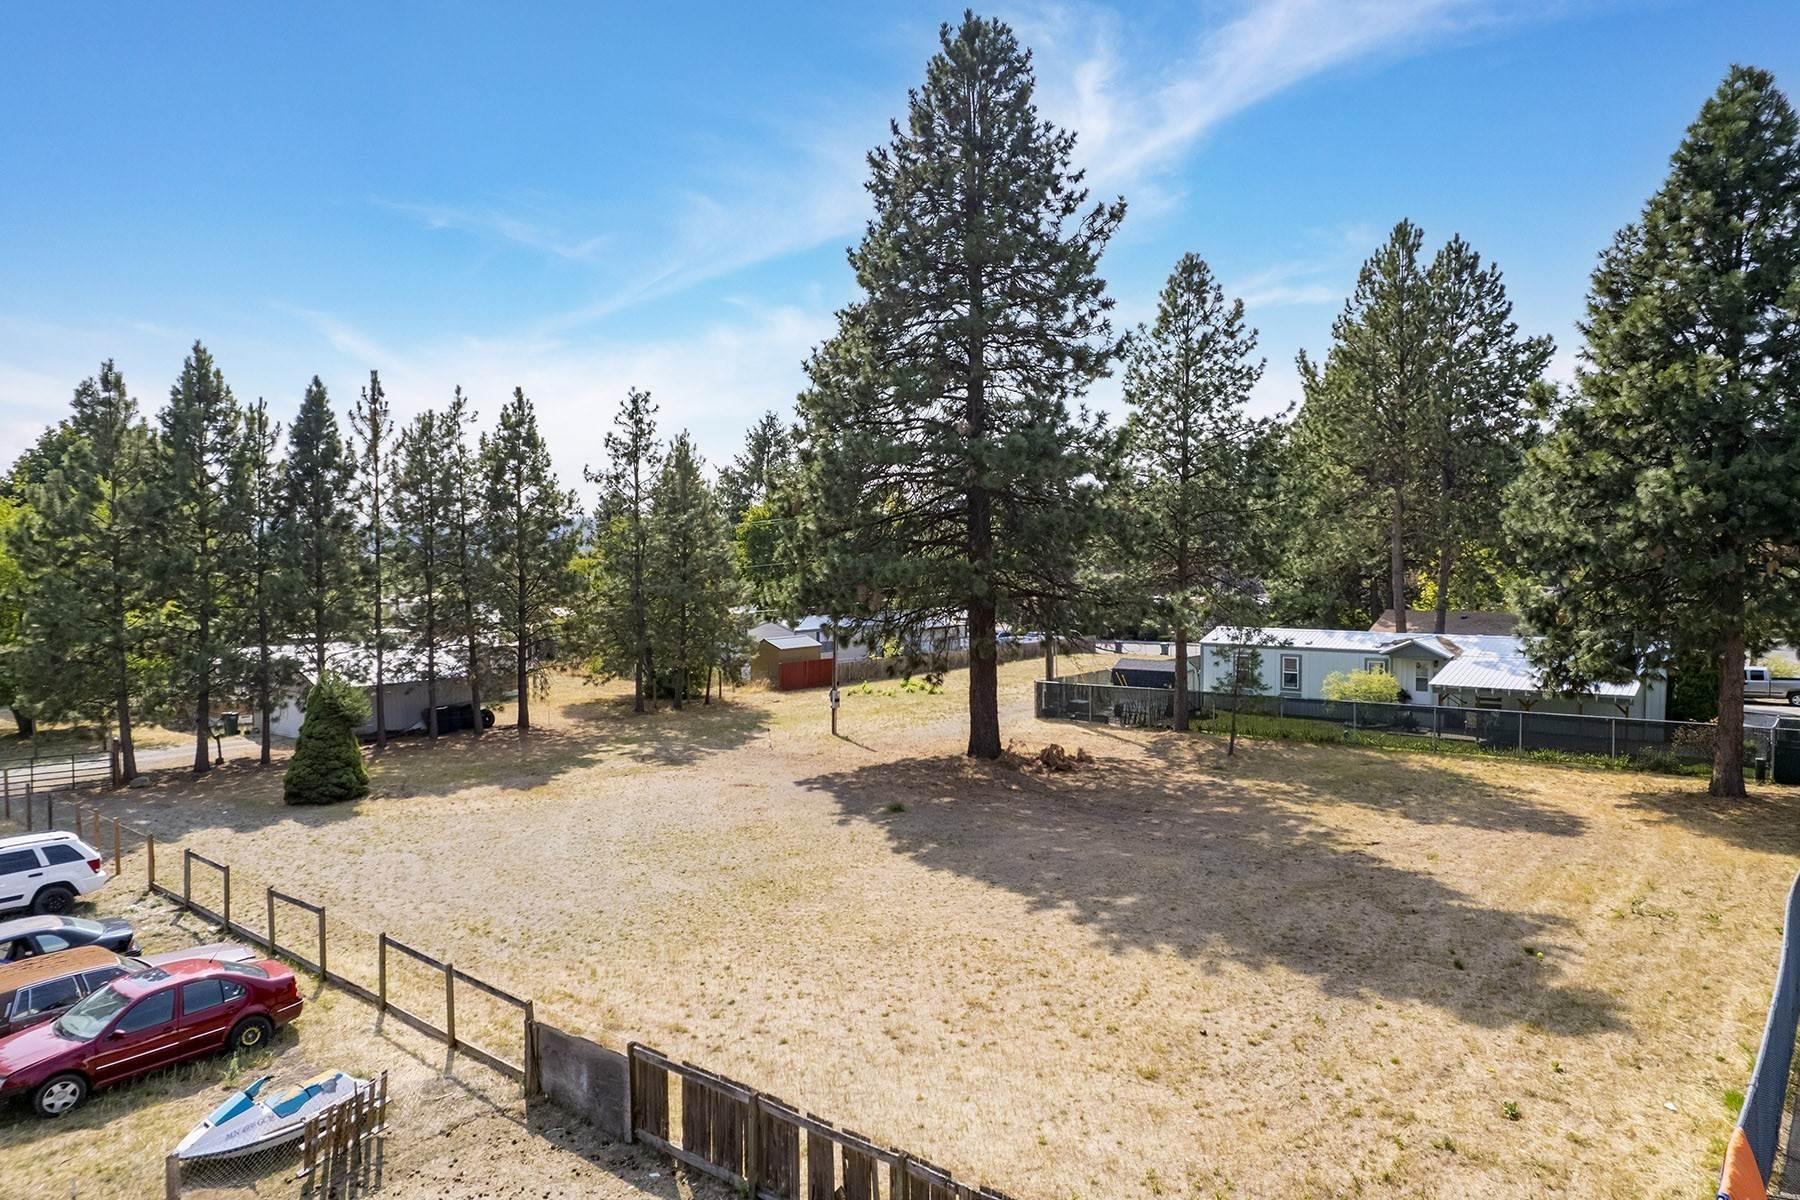 16. Land for Sale at Mid Town Vacant Lot 3102 N Francis St Coeur d’Alene, Idaho 83815 United States